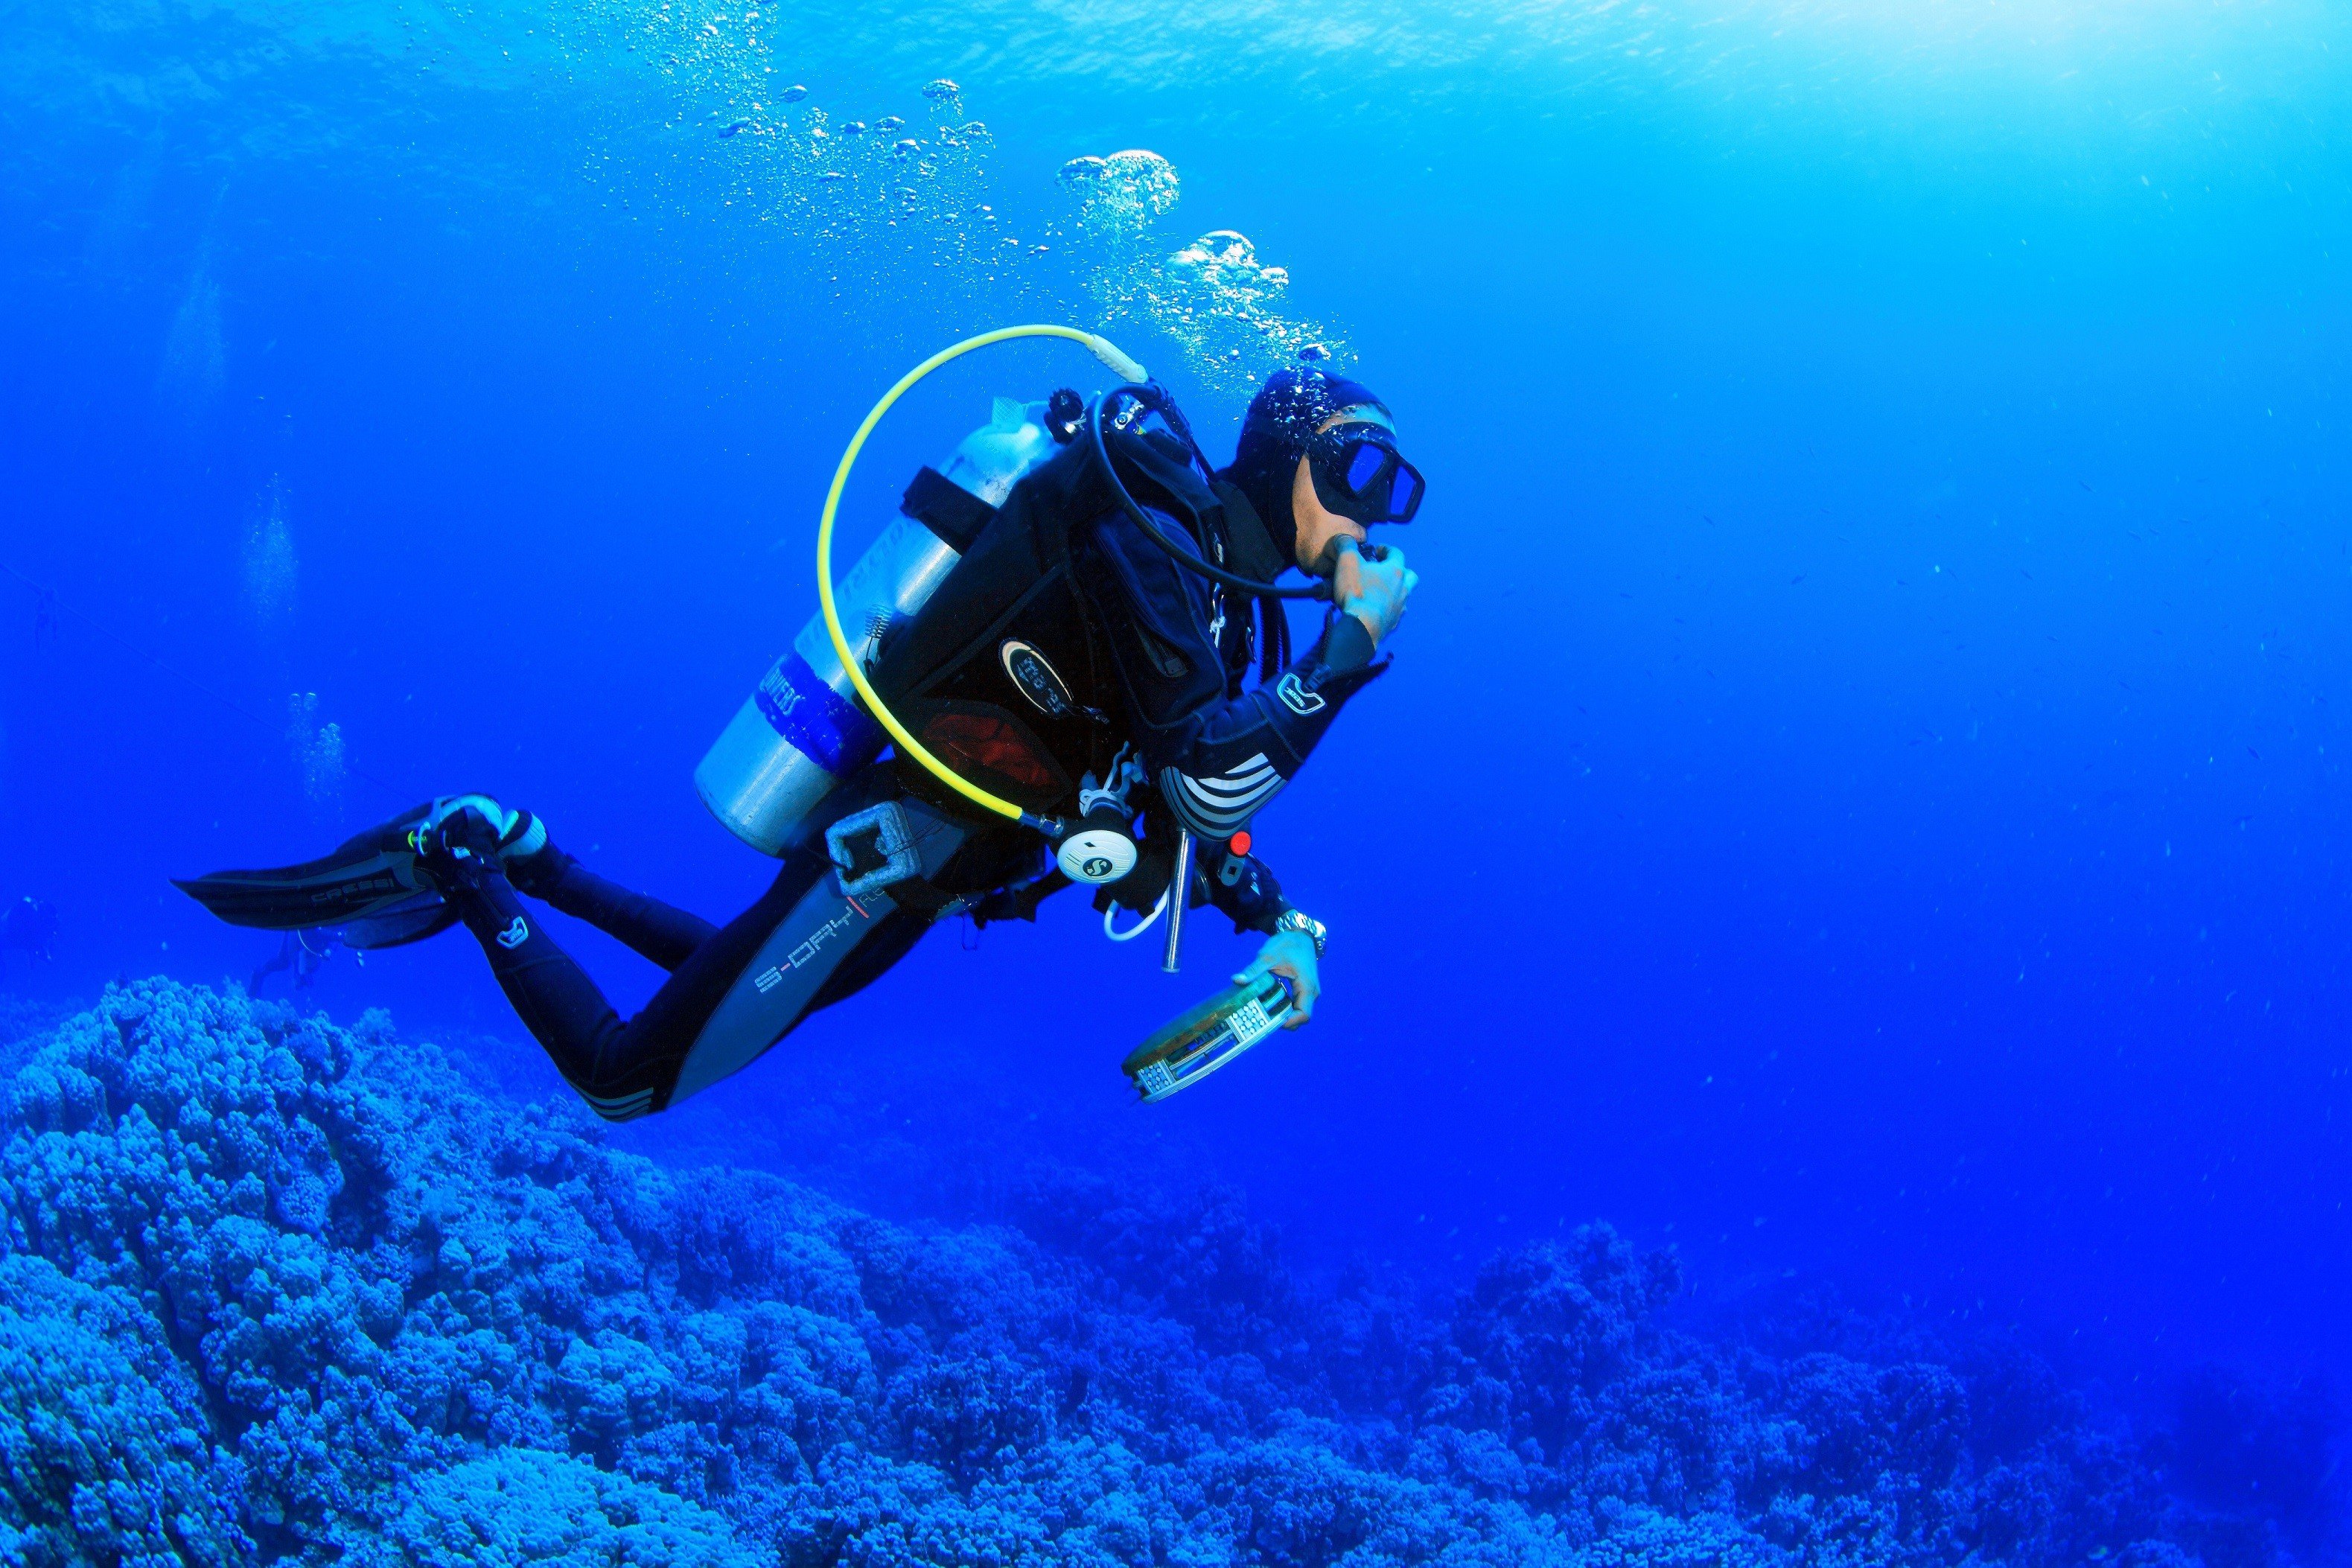 Wallpaper Blink of Diving Wallpaper HD for Android, Windows